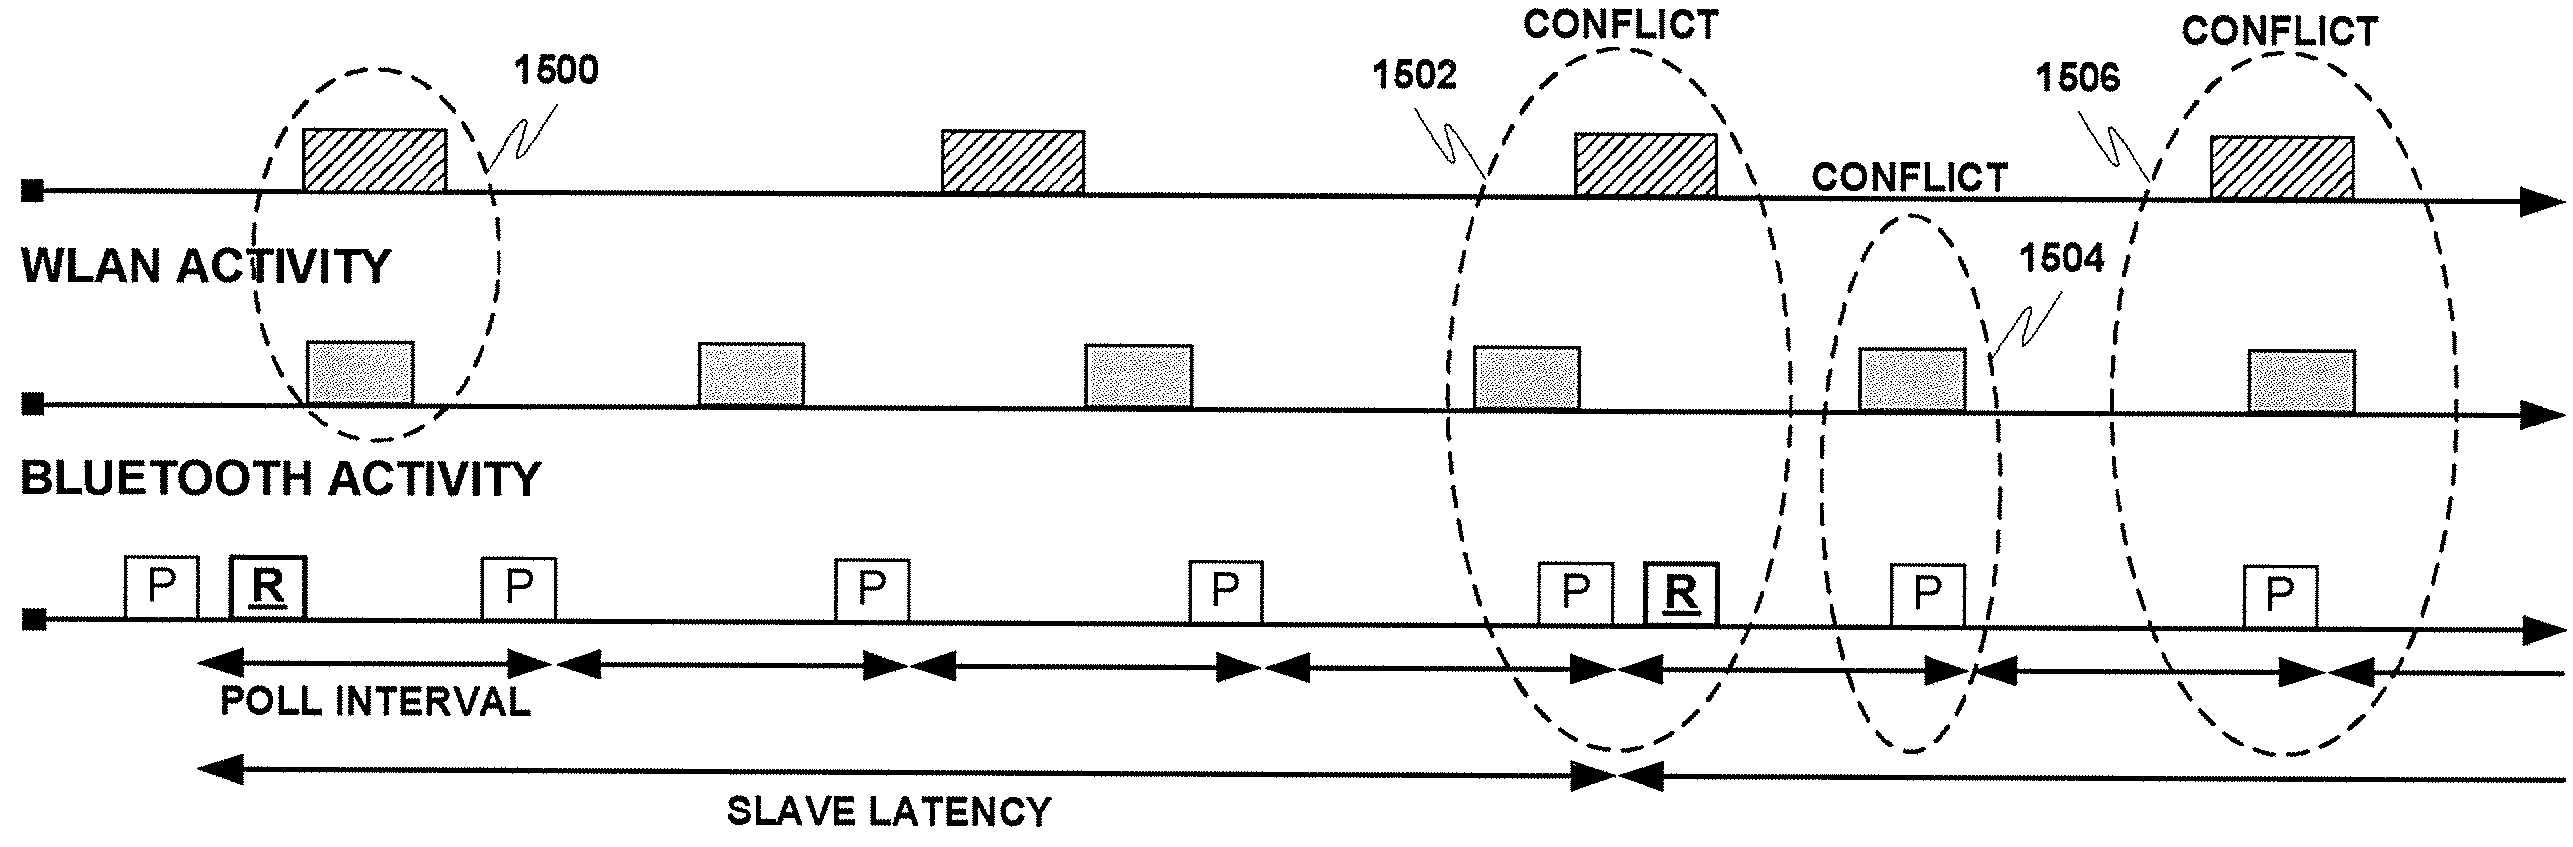 Managing low-power wireless mediums in multiradio devices